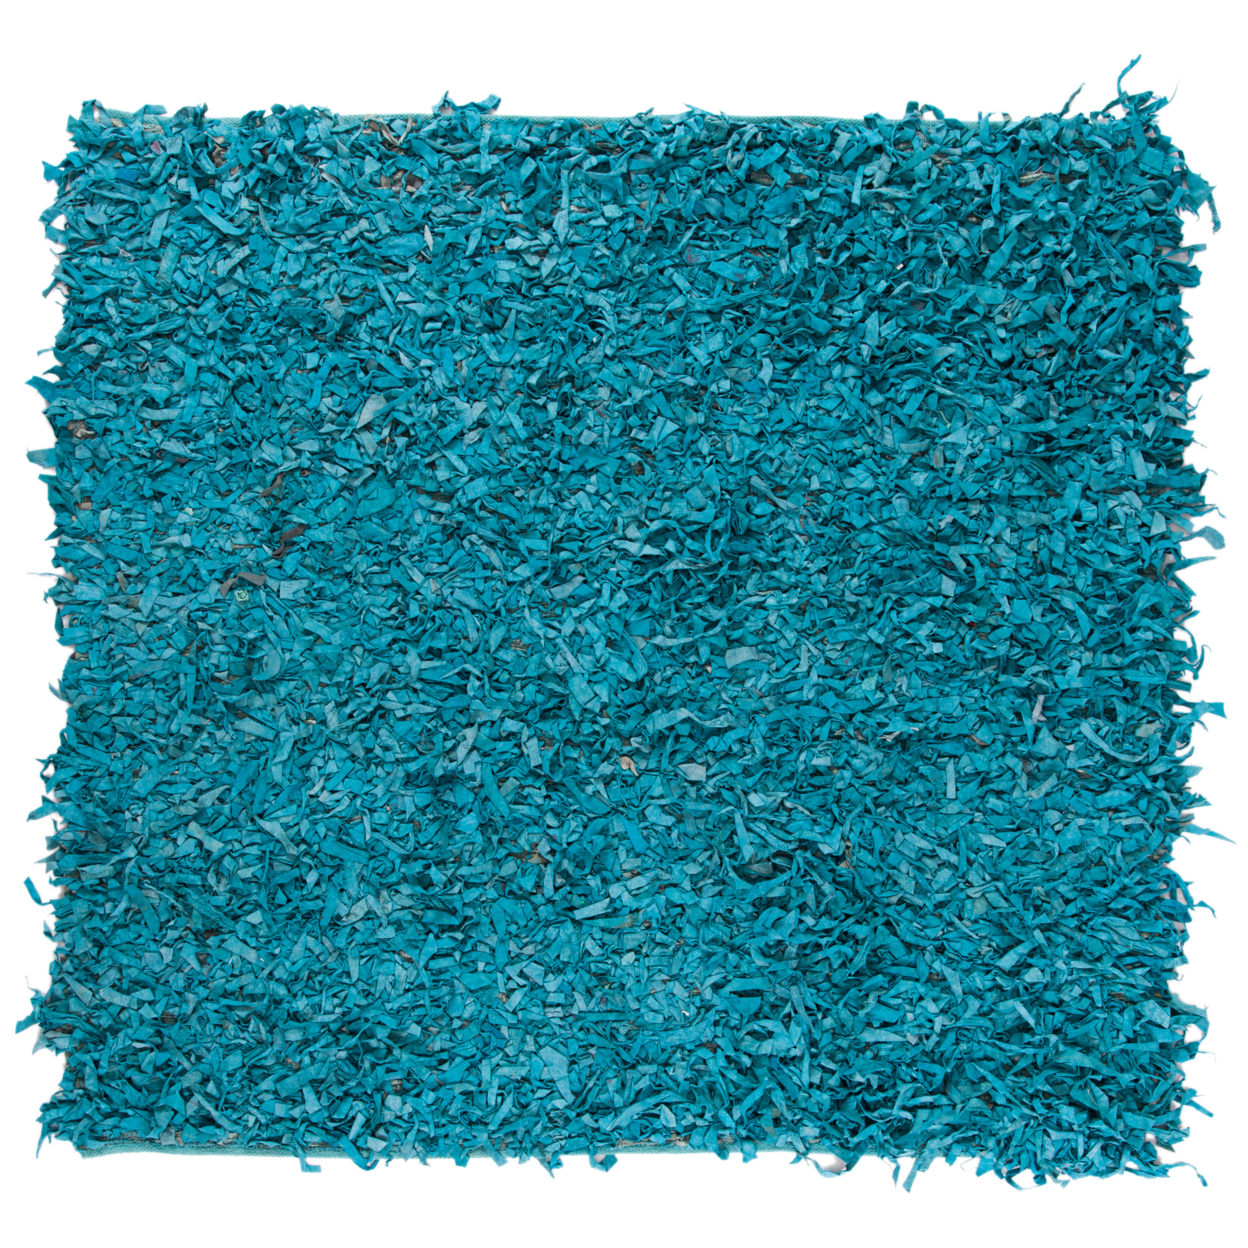 SAFAVIEH Leather Shag LSG511L Hand-knotted Light Blue Rug - 6' Square